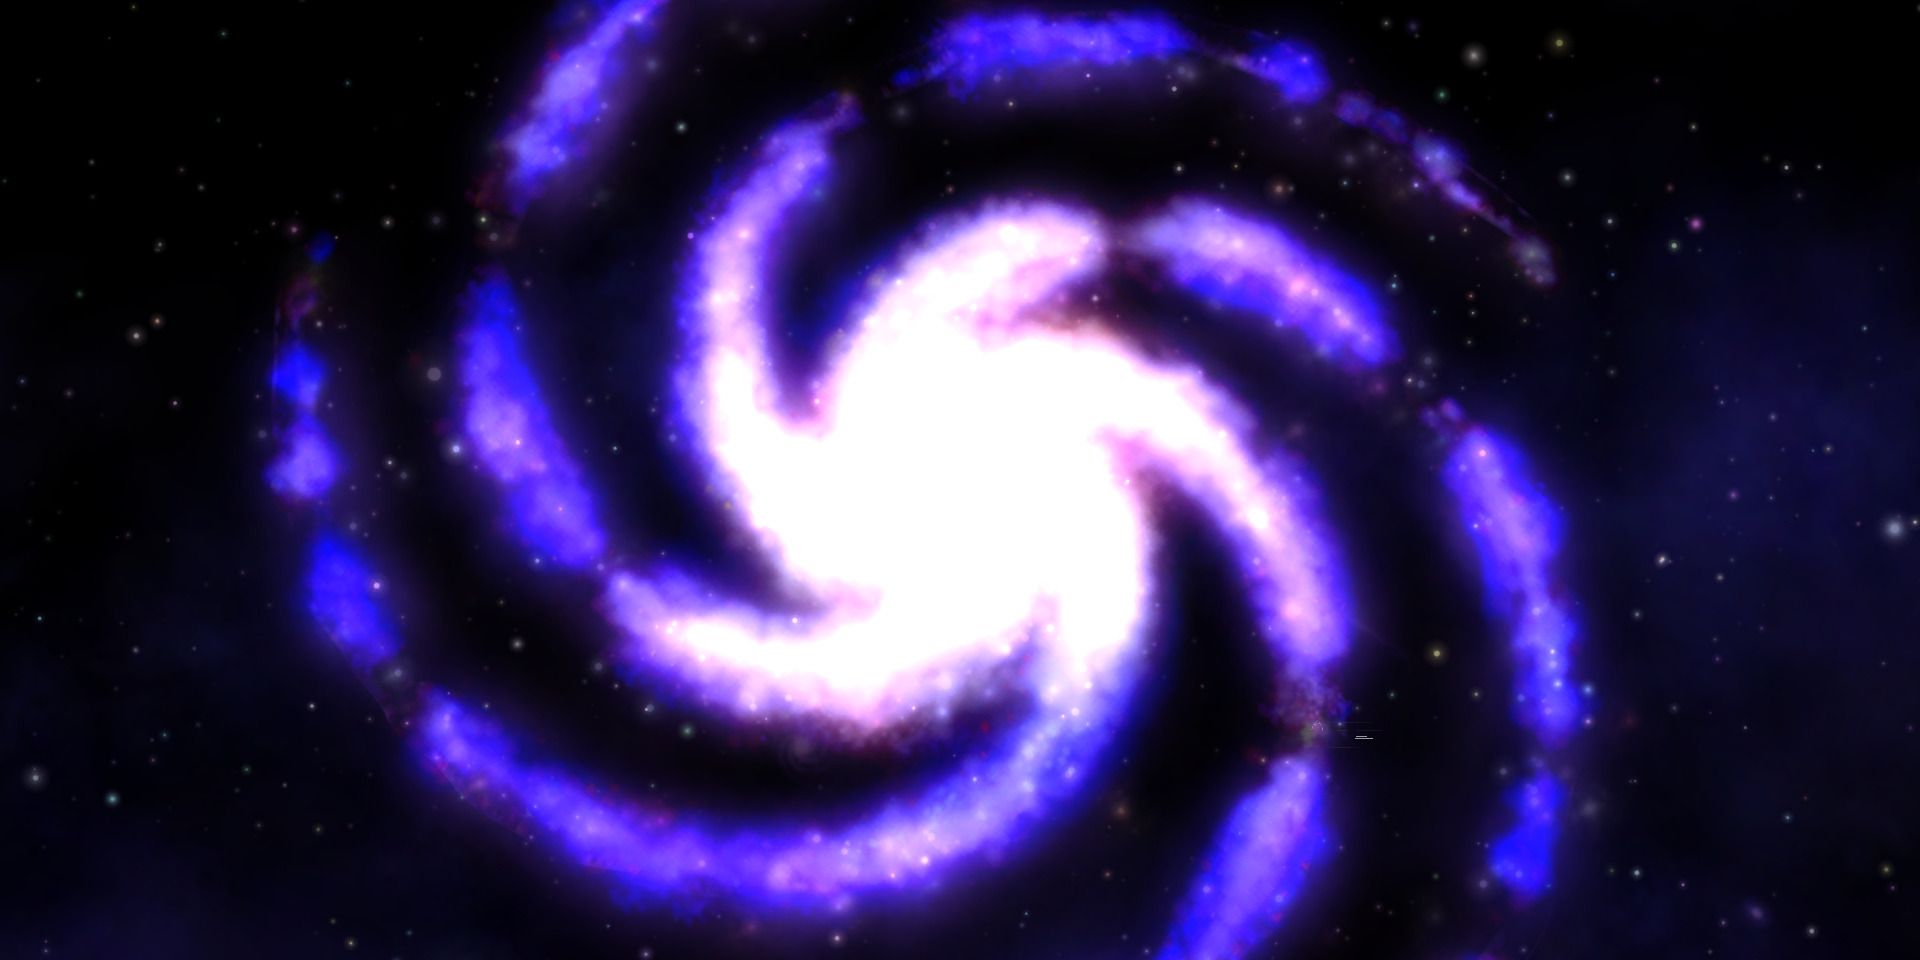 The Galaxy of Spore's Space Stage